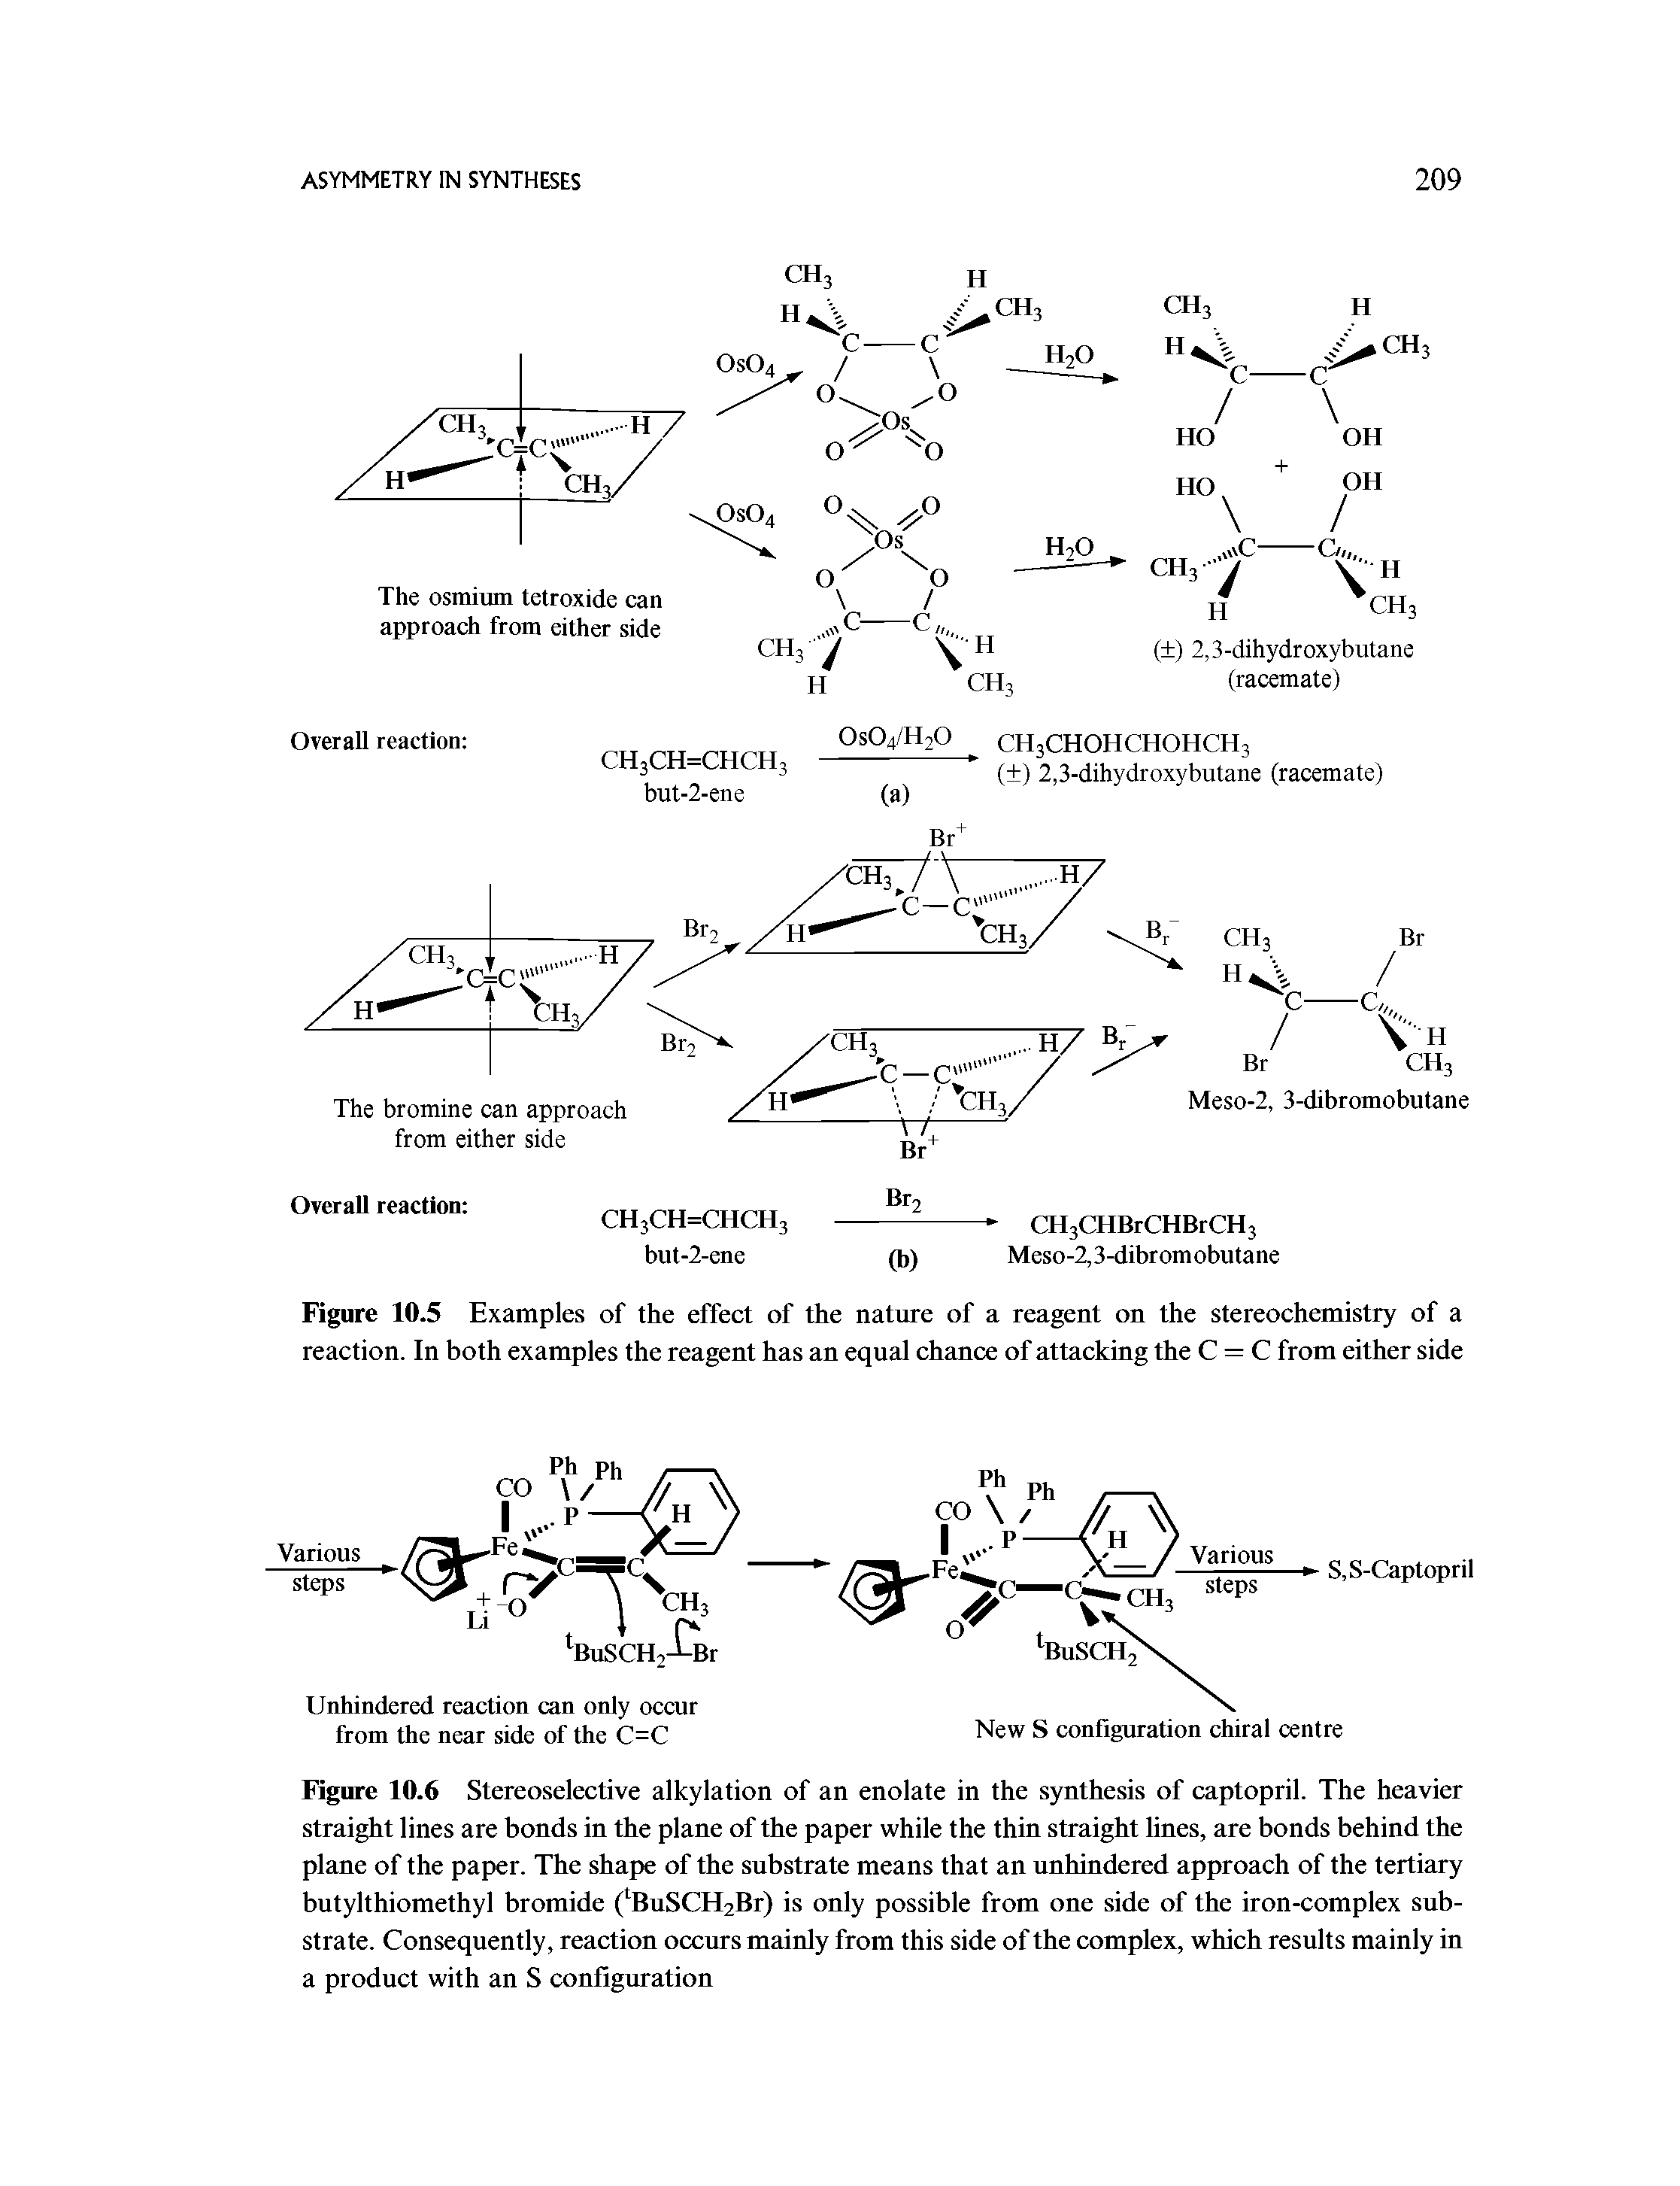 Figure 10.6 Stereoselective alkylation of an enolate in the synthesis of captopril. The heavier straight lines are bonds in the plane of the paper while the thin straight lines, are bonds behind the plane of the paper. The shape of the substrate means that an unhindered approach of the tertiary butylthiomethyl bromide (tBuSCH2Br) is only possible from one side of the iron-complex substrate. Consequently, reaction occurs mainly from this side of the complex, which results mainly in a product with an S configuration...